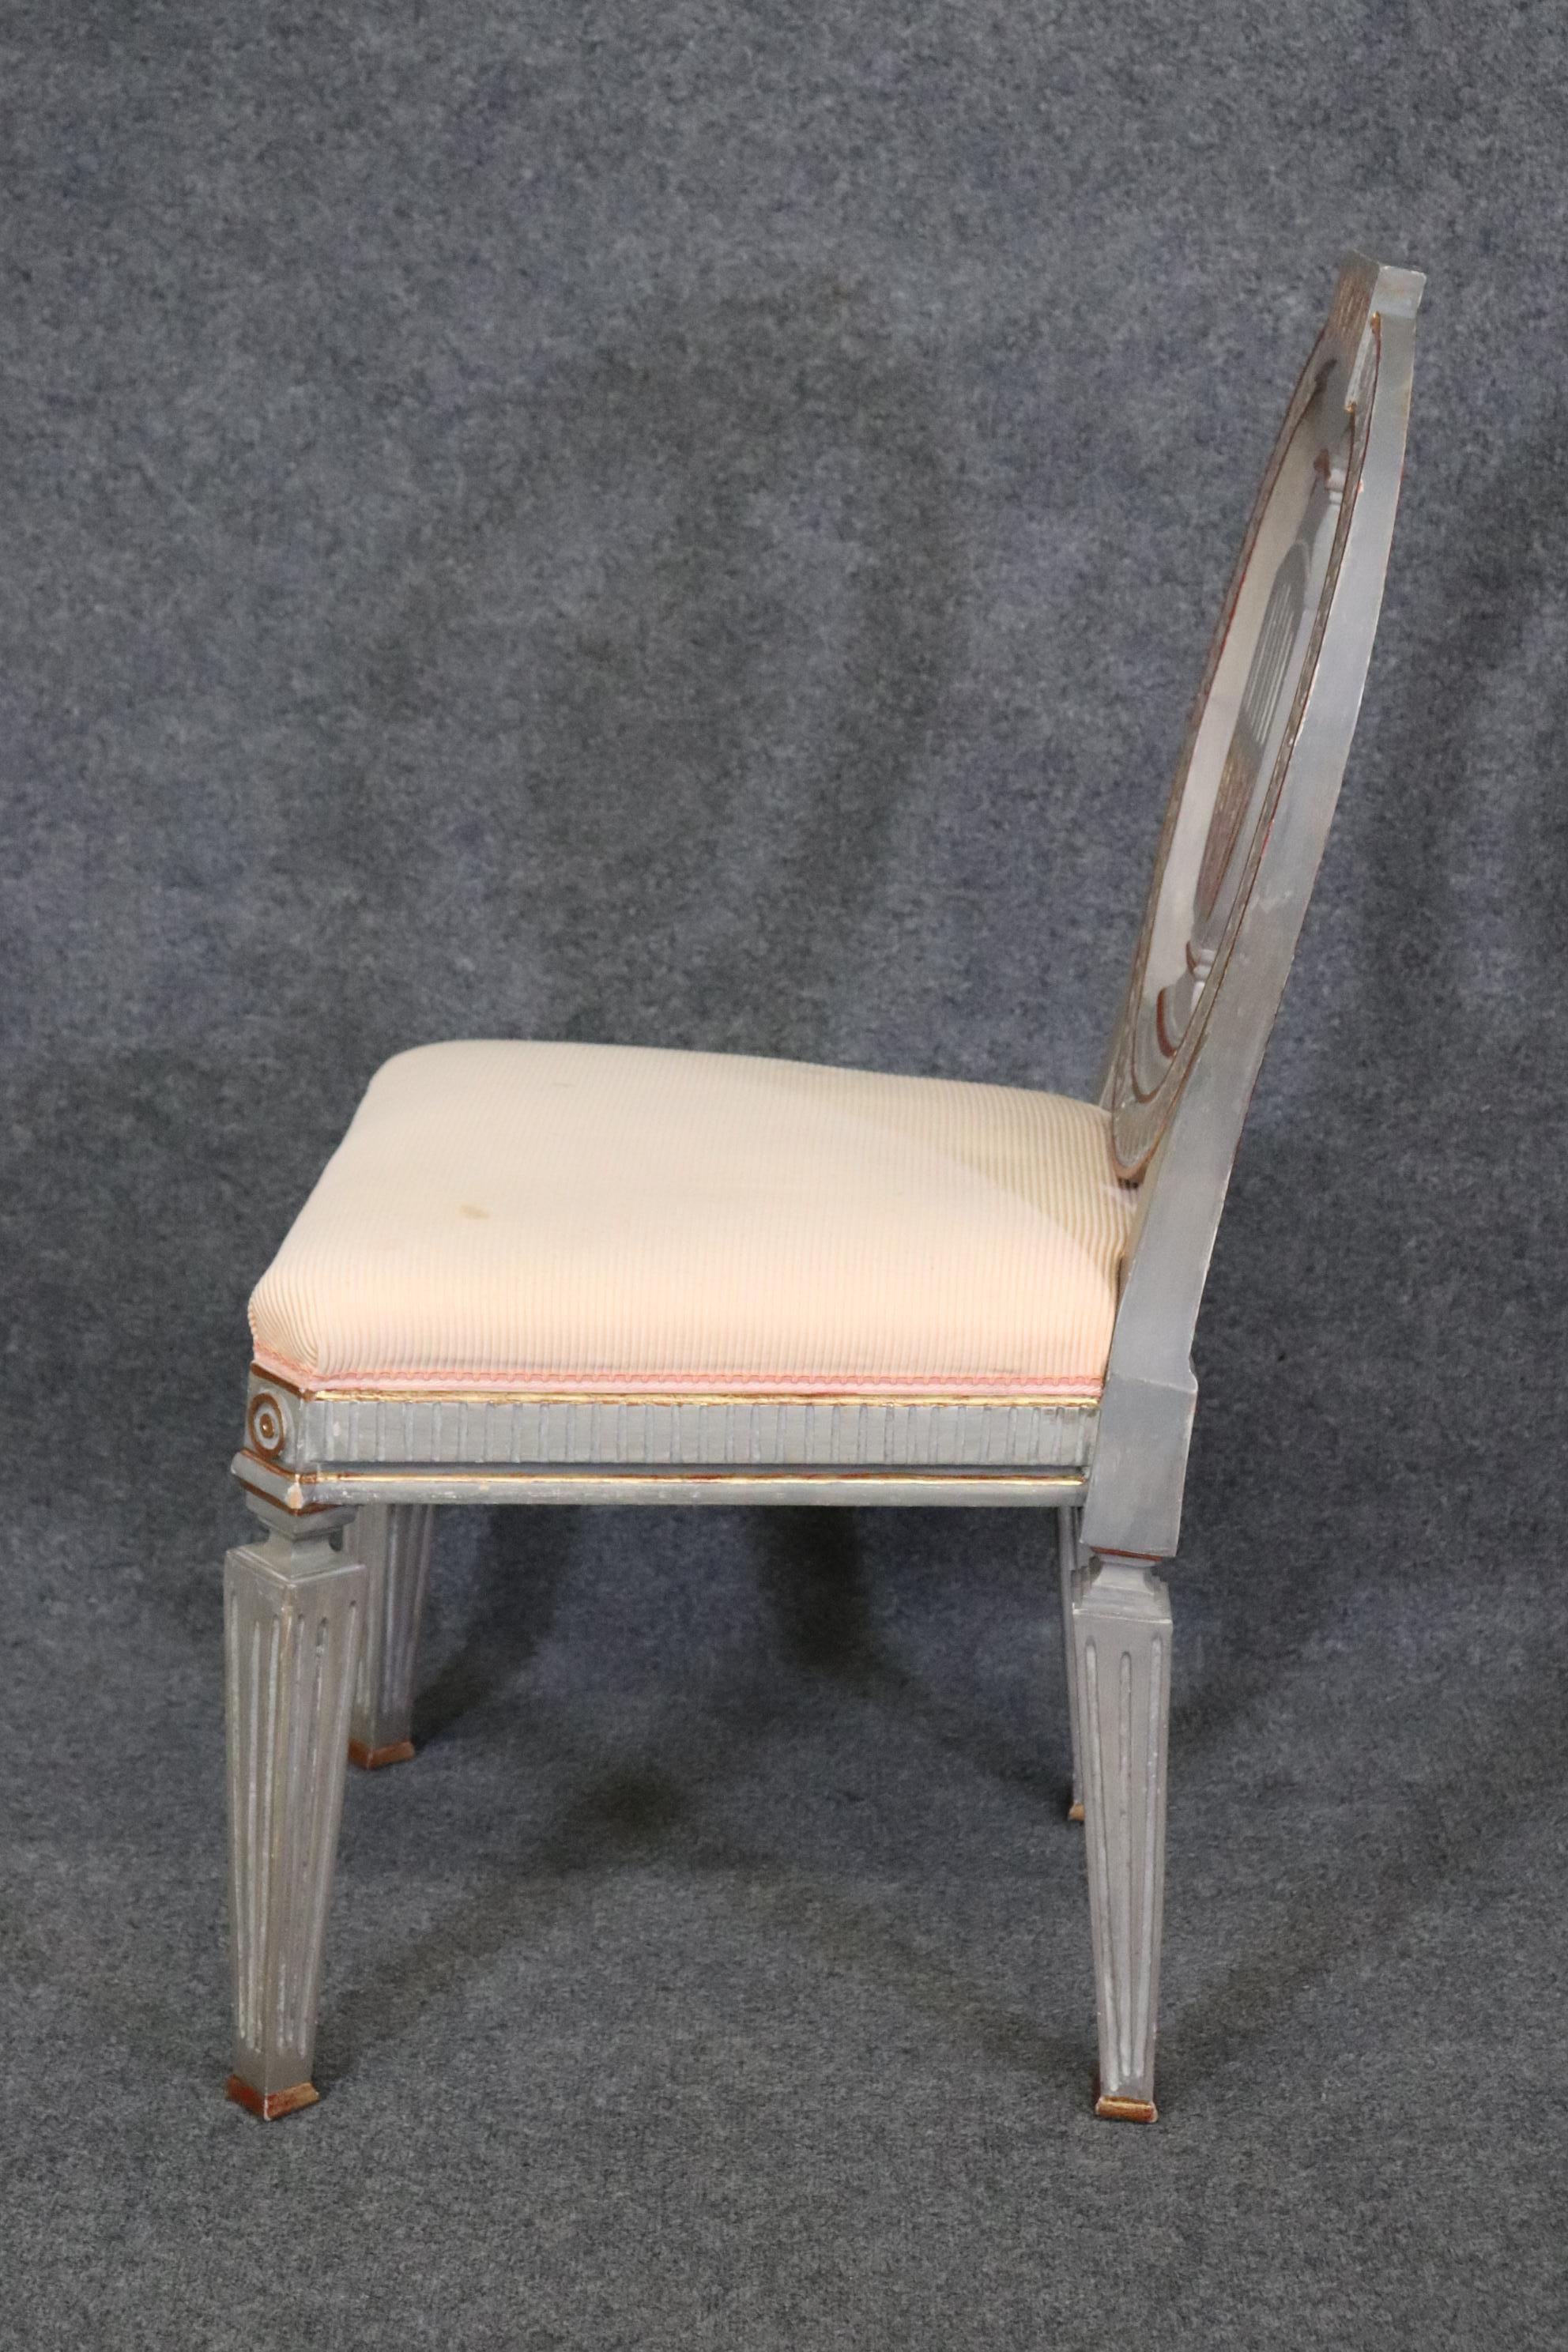 Set 10 Genuine Swedish Gustavian Gilded Gray Paint Decorated Dining Chairs  For Sale 2